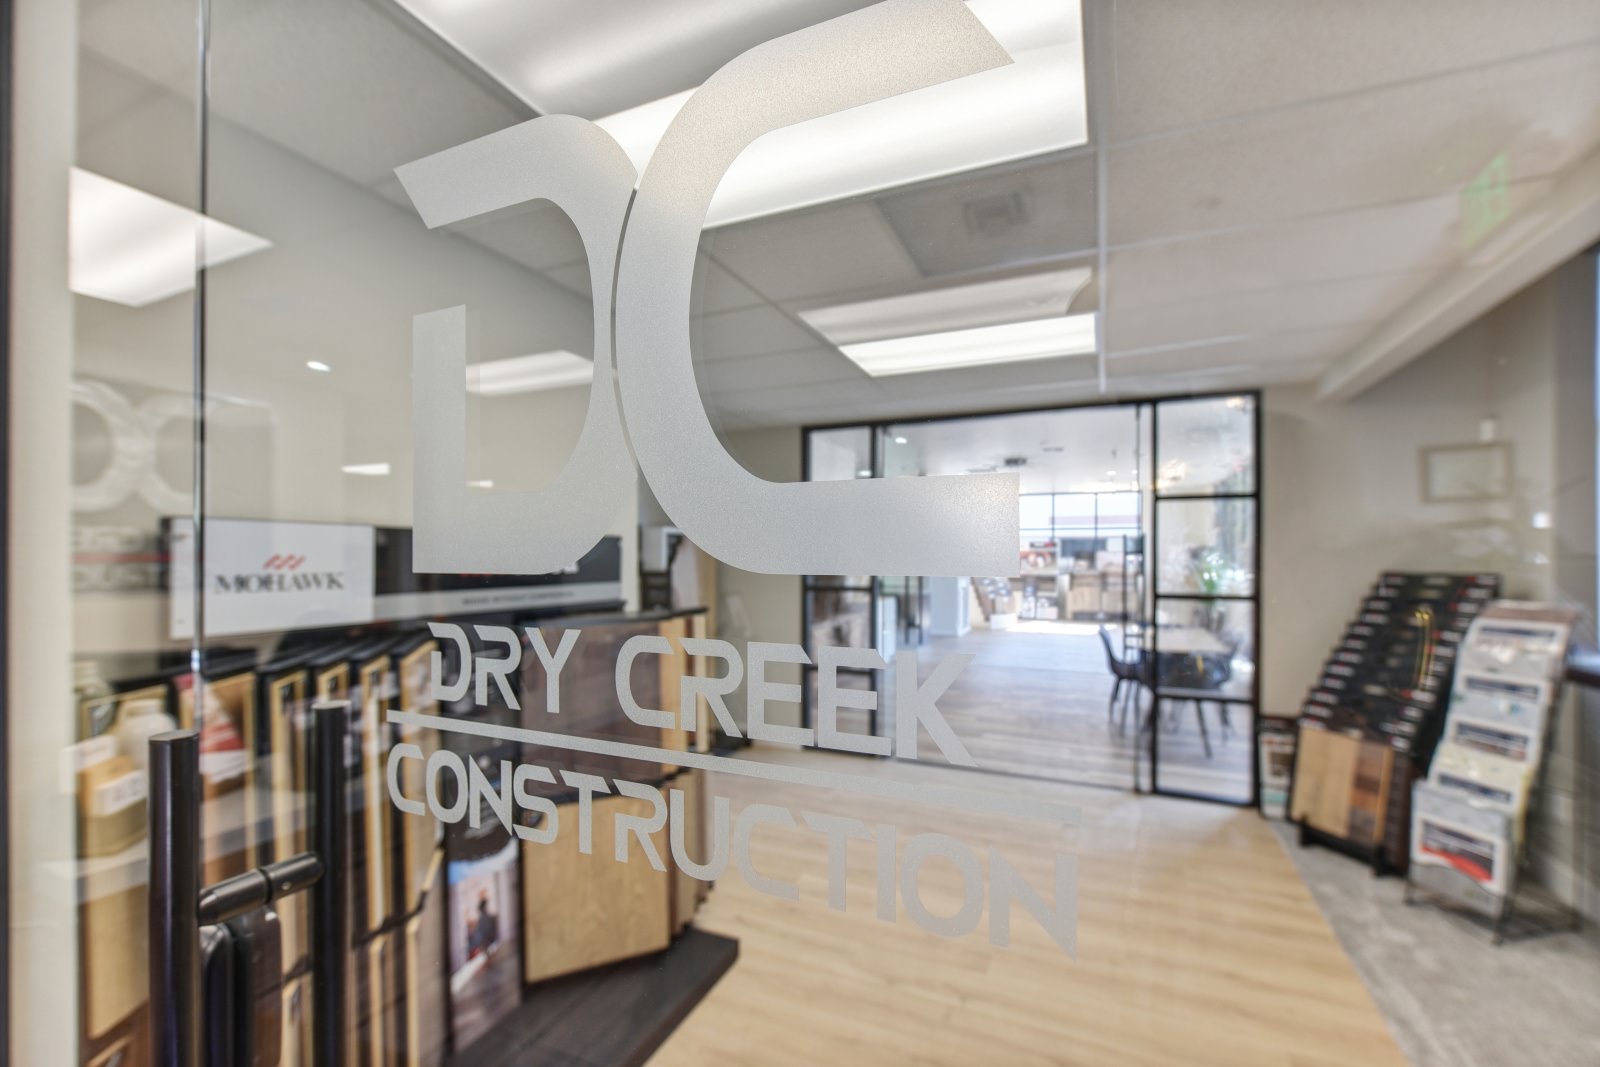 Dry Creek Construction's showroom featuring various flooring types